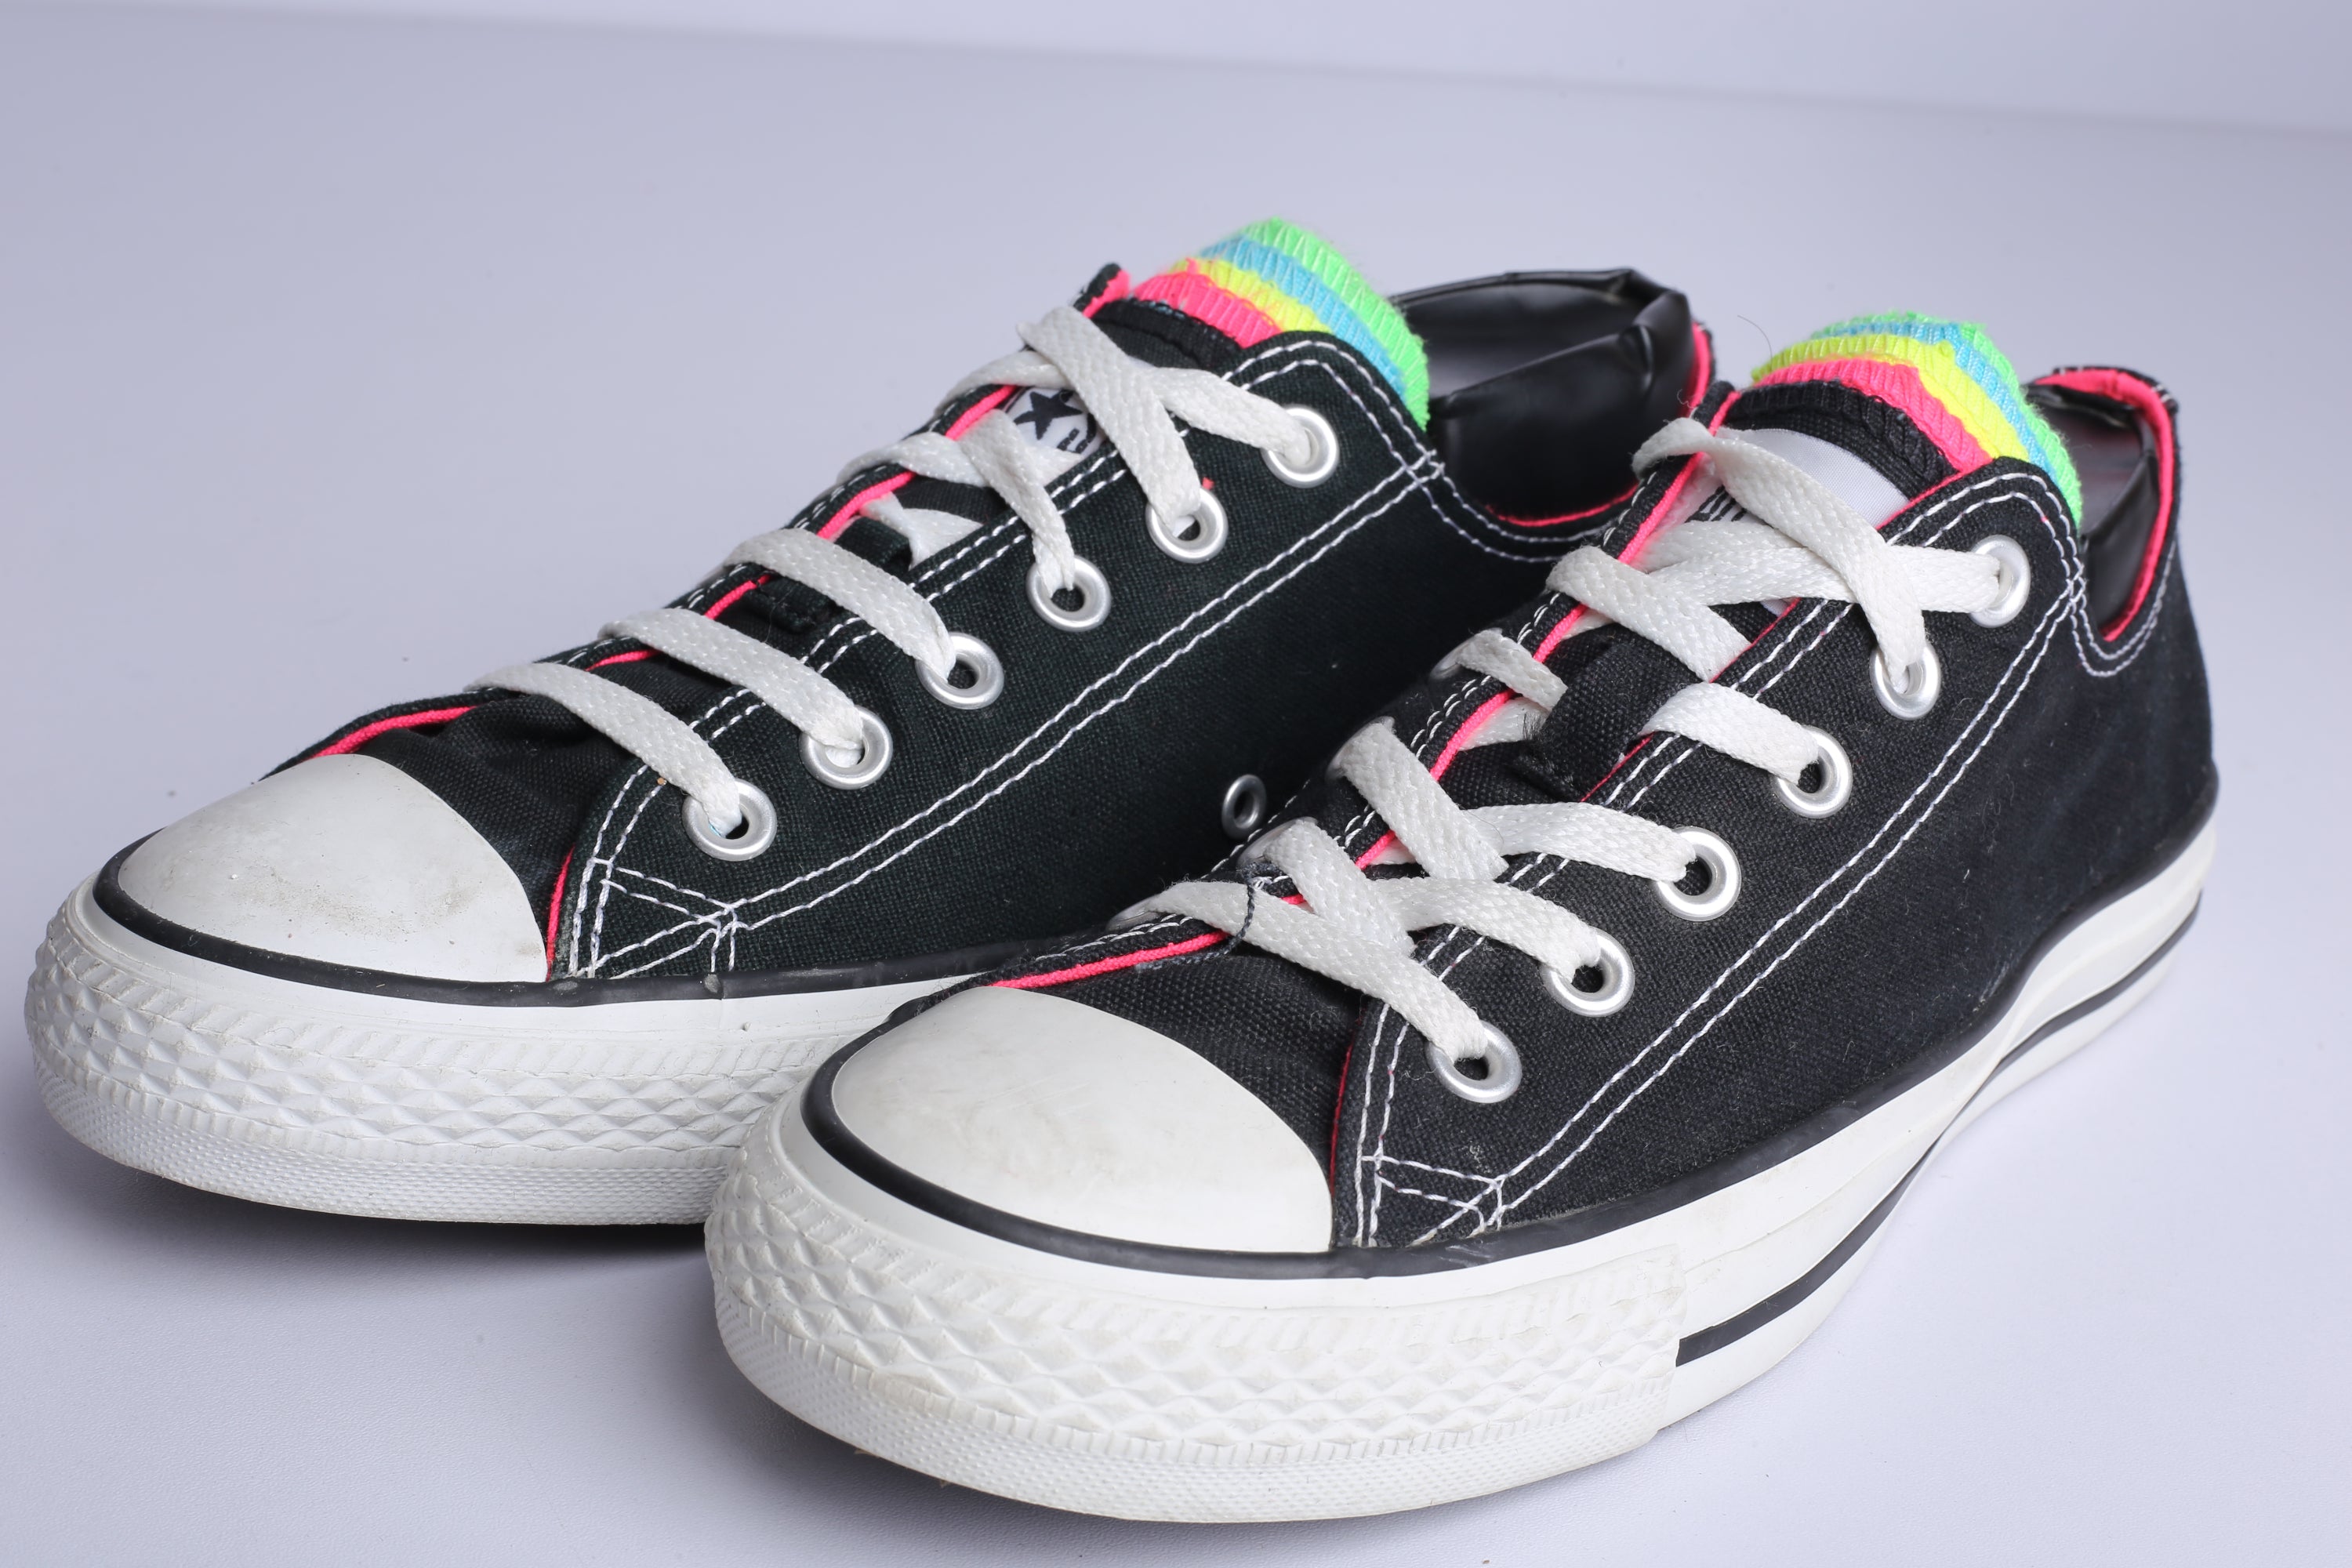 Chuck Taylor All Star Low Navy Rainbow Sneaker (Condition Premium)